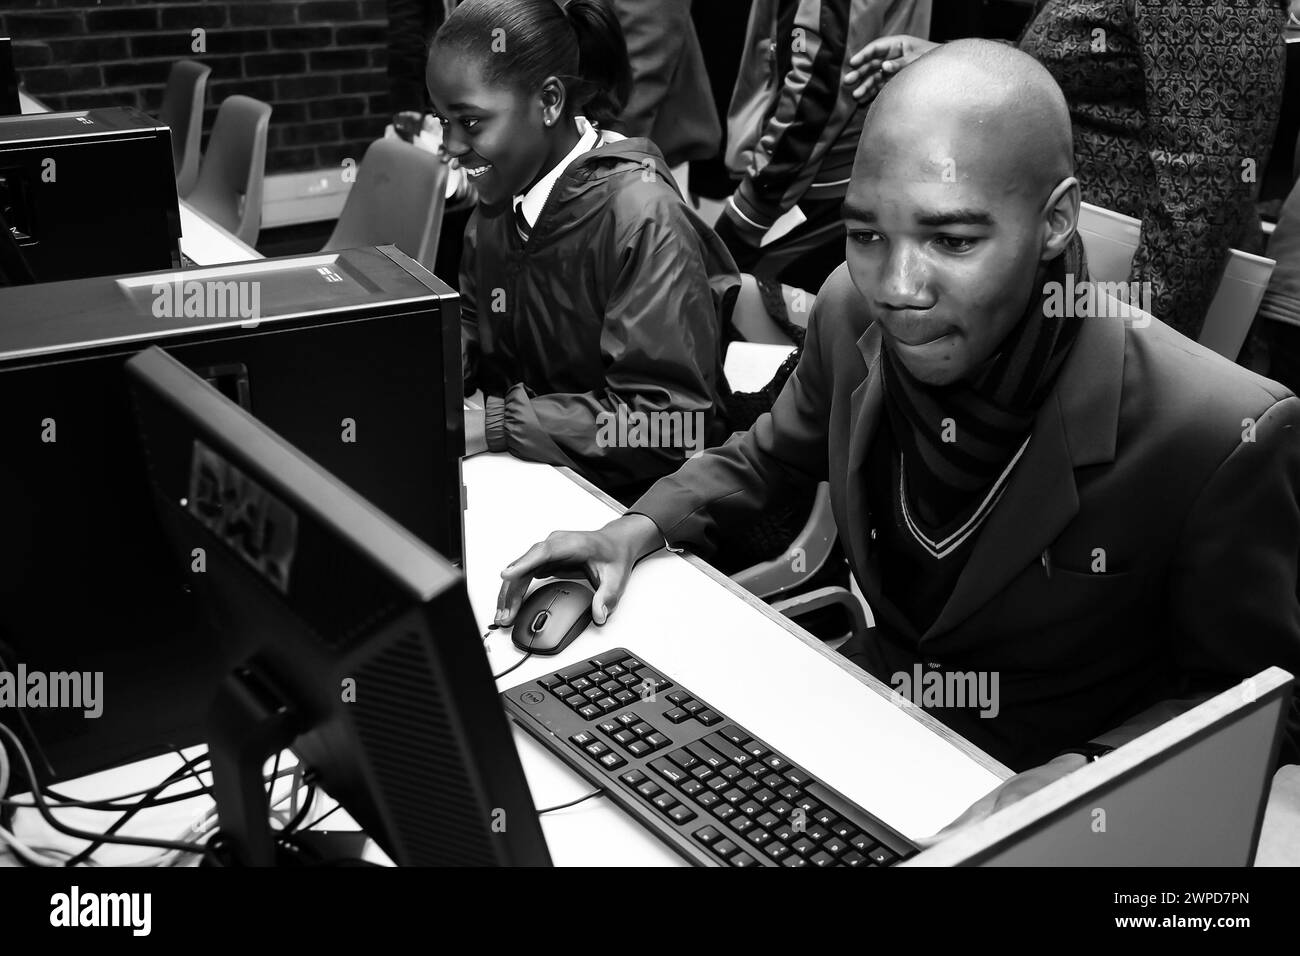 A monochrome shot of individuals at work on computers in Johannesburg, South Africa Stock Photo